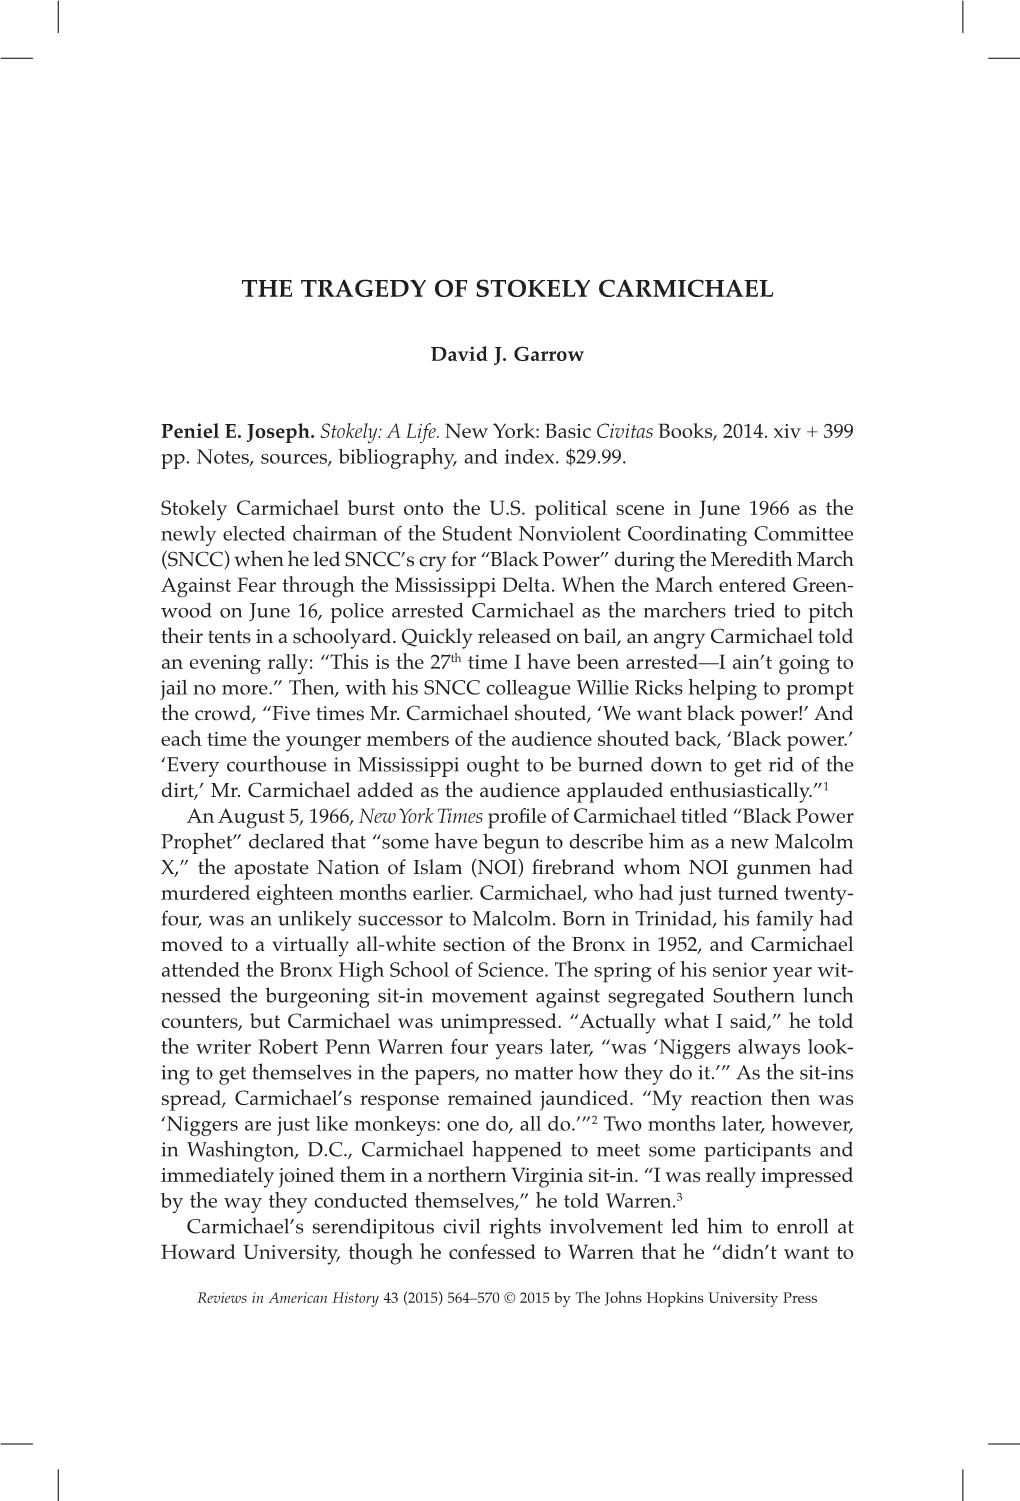 The Tragedy of Stokely Carmichael